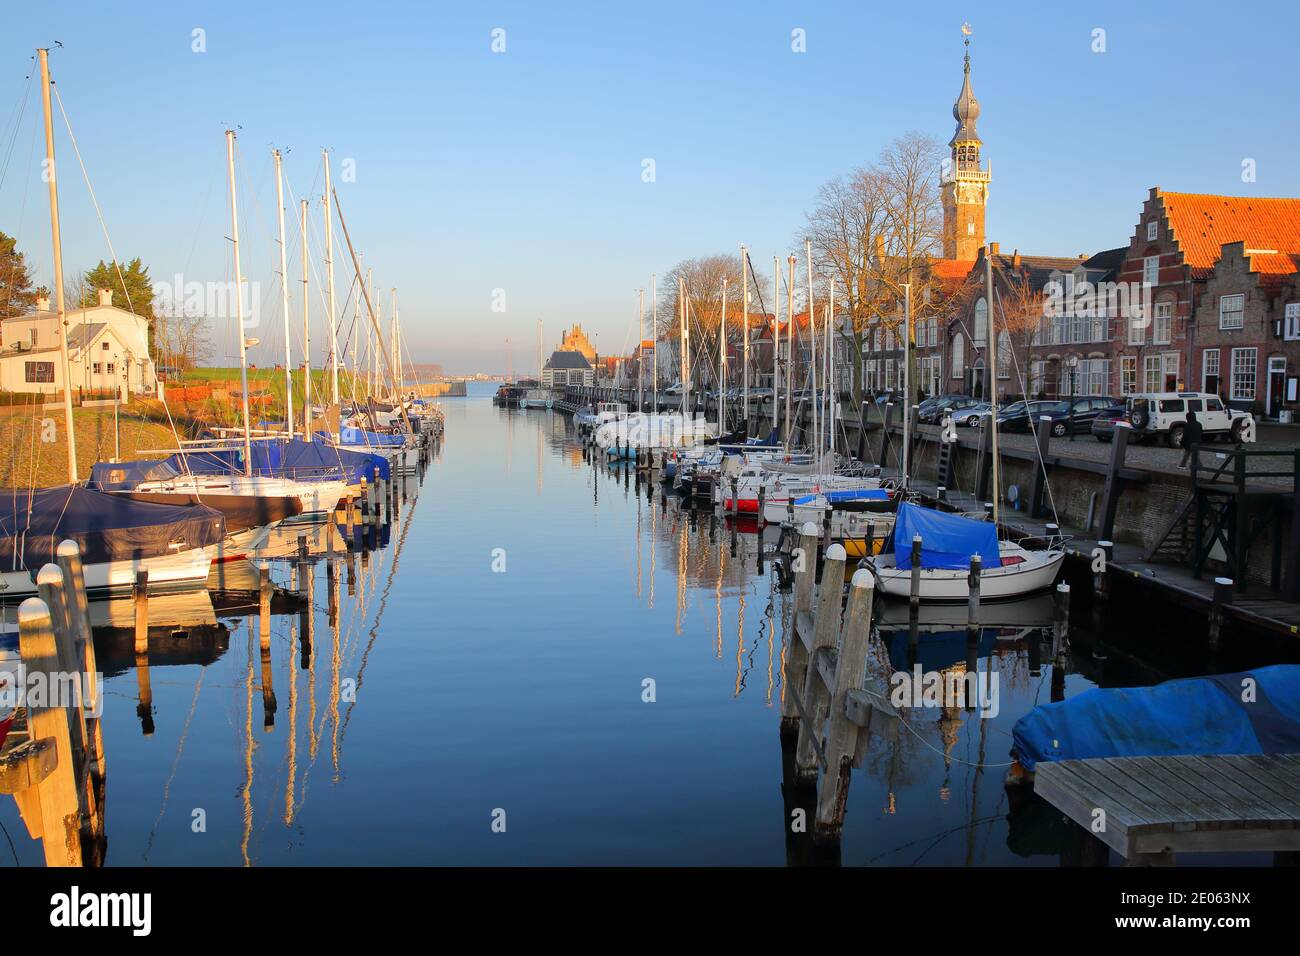 VEERE, NETHERLANDS - DECEMBER 10, 2020: The marina (harbor) and historic buildings with the clock tower of the Stadhuis (town hall) Stock Photo